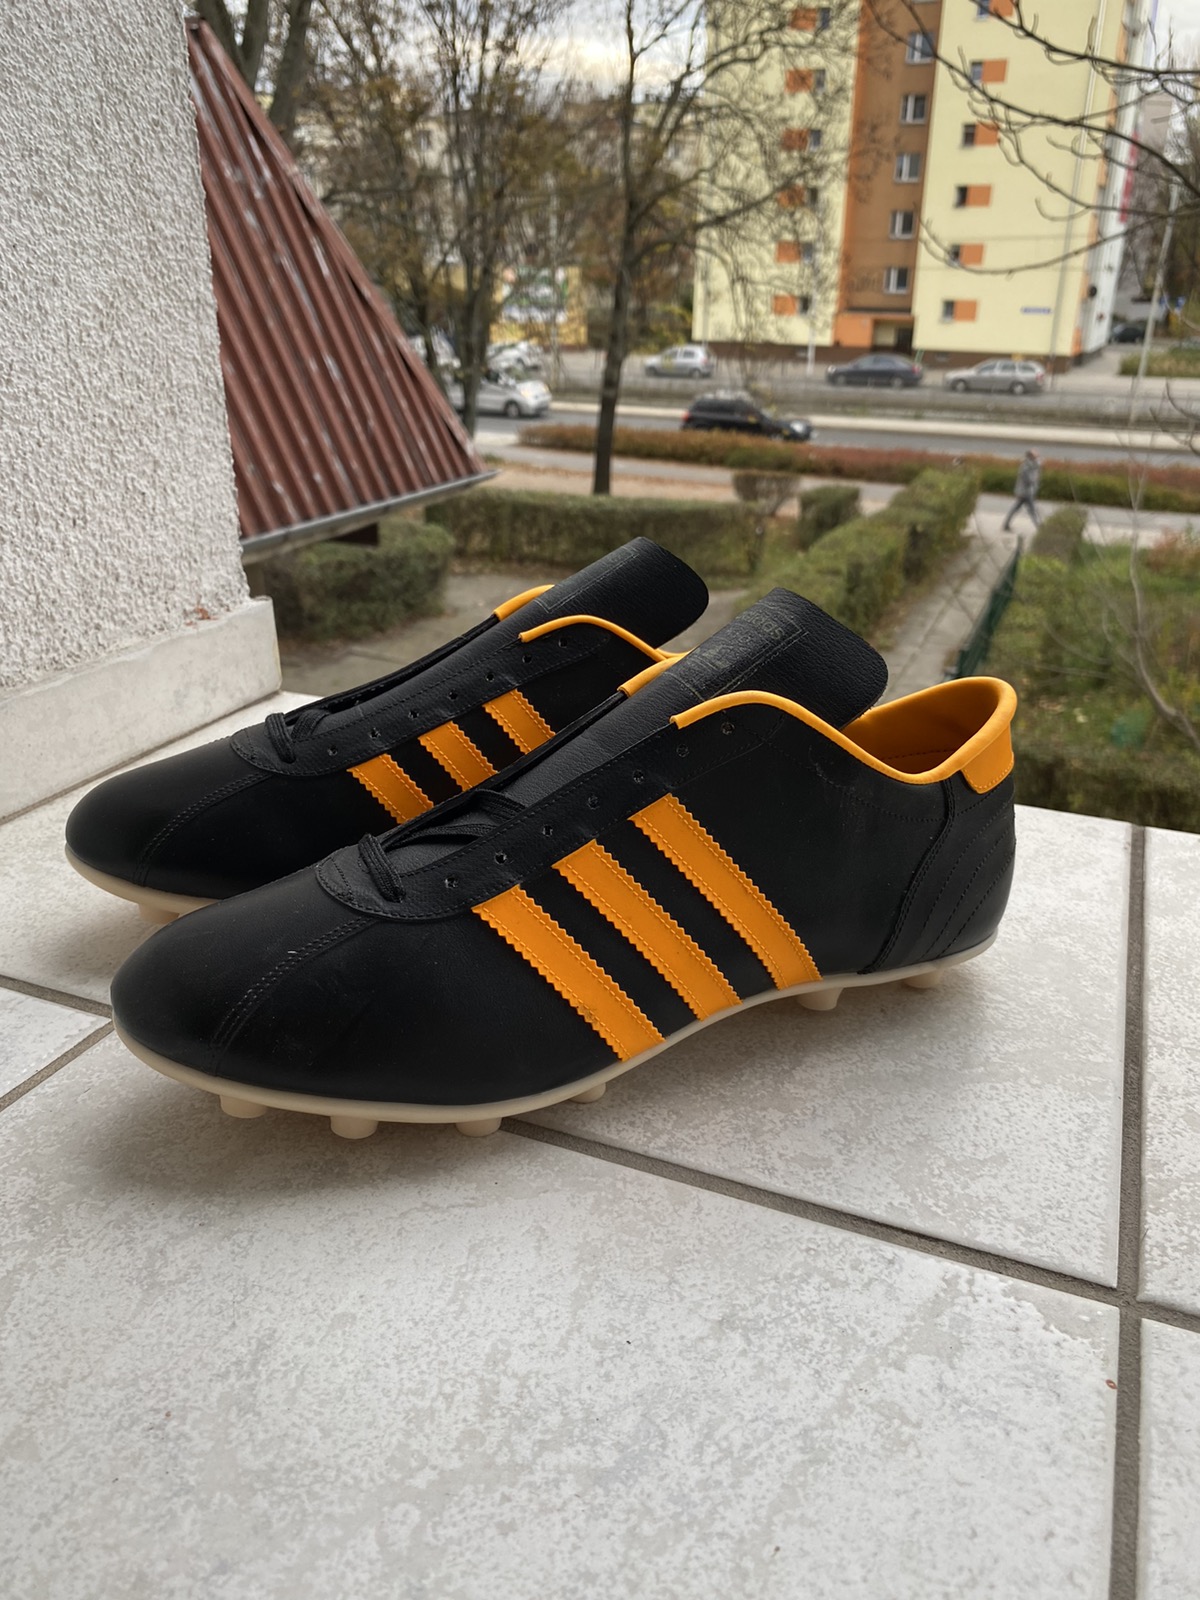 Adidas Kid made in France 70-80s football boots - 1